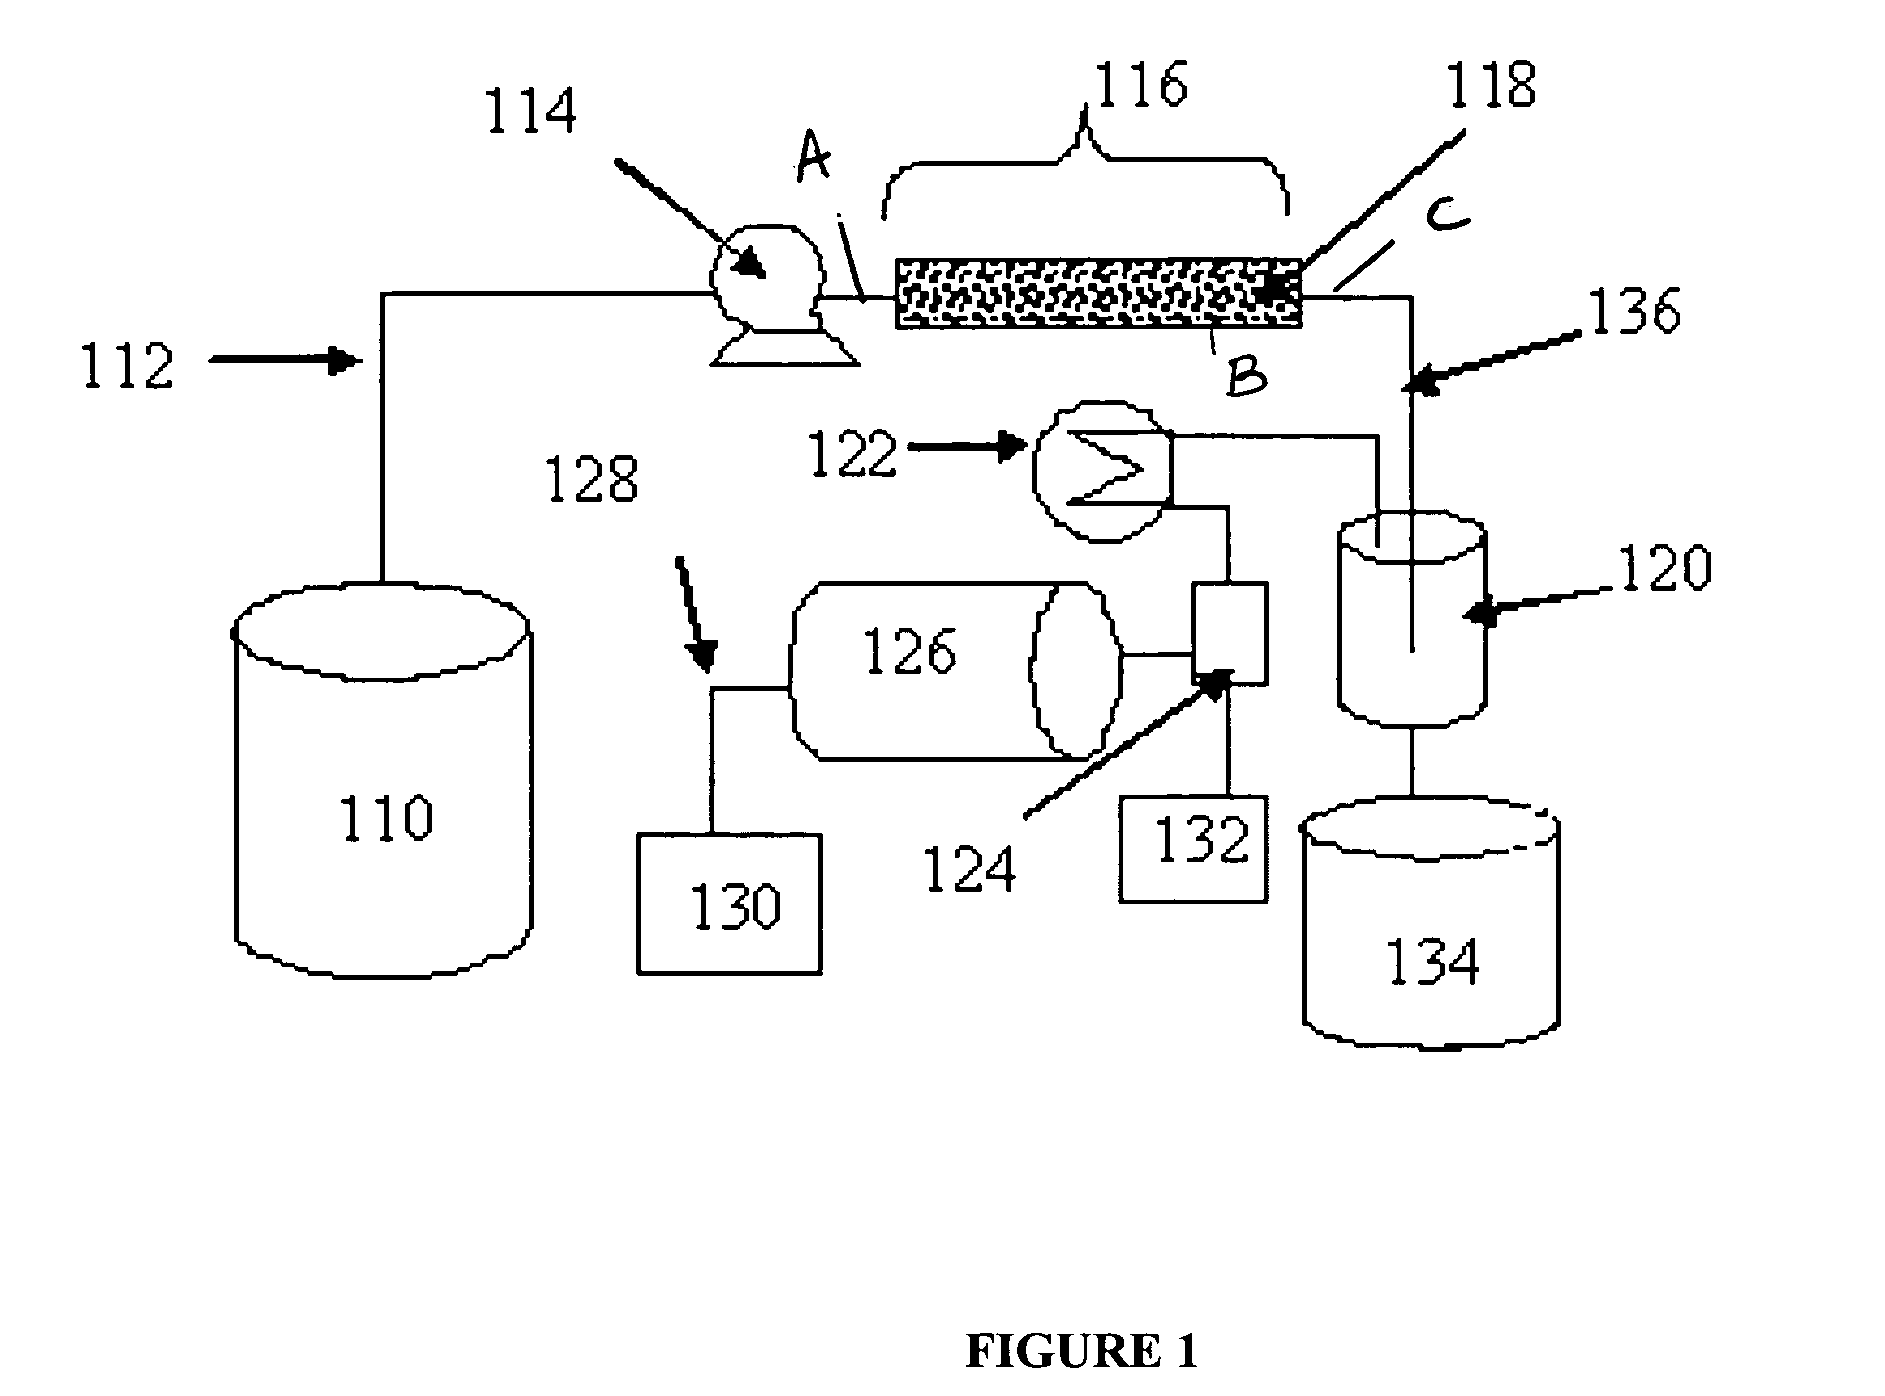 Systems and methods for controlling hydrogen generation